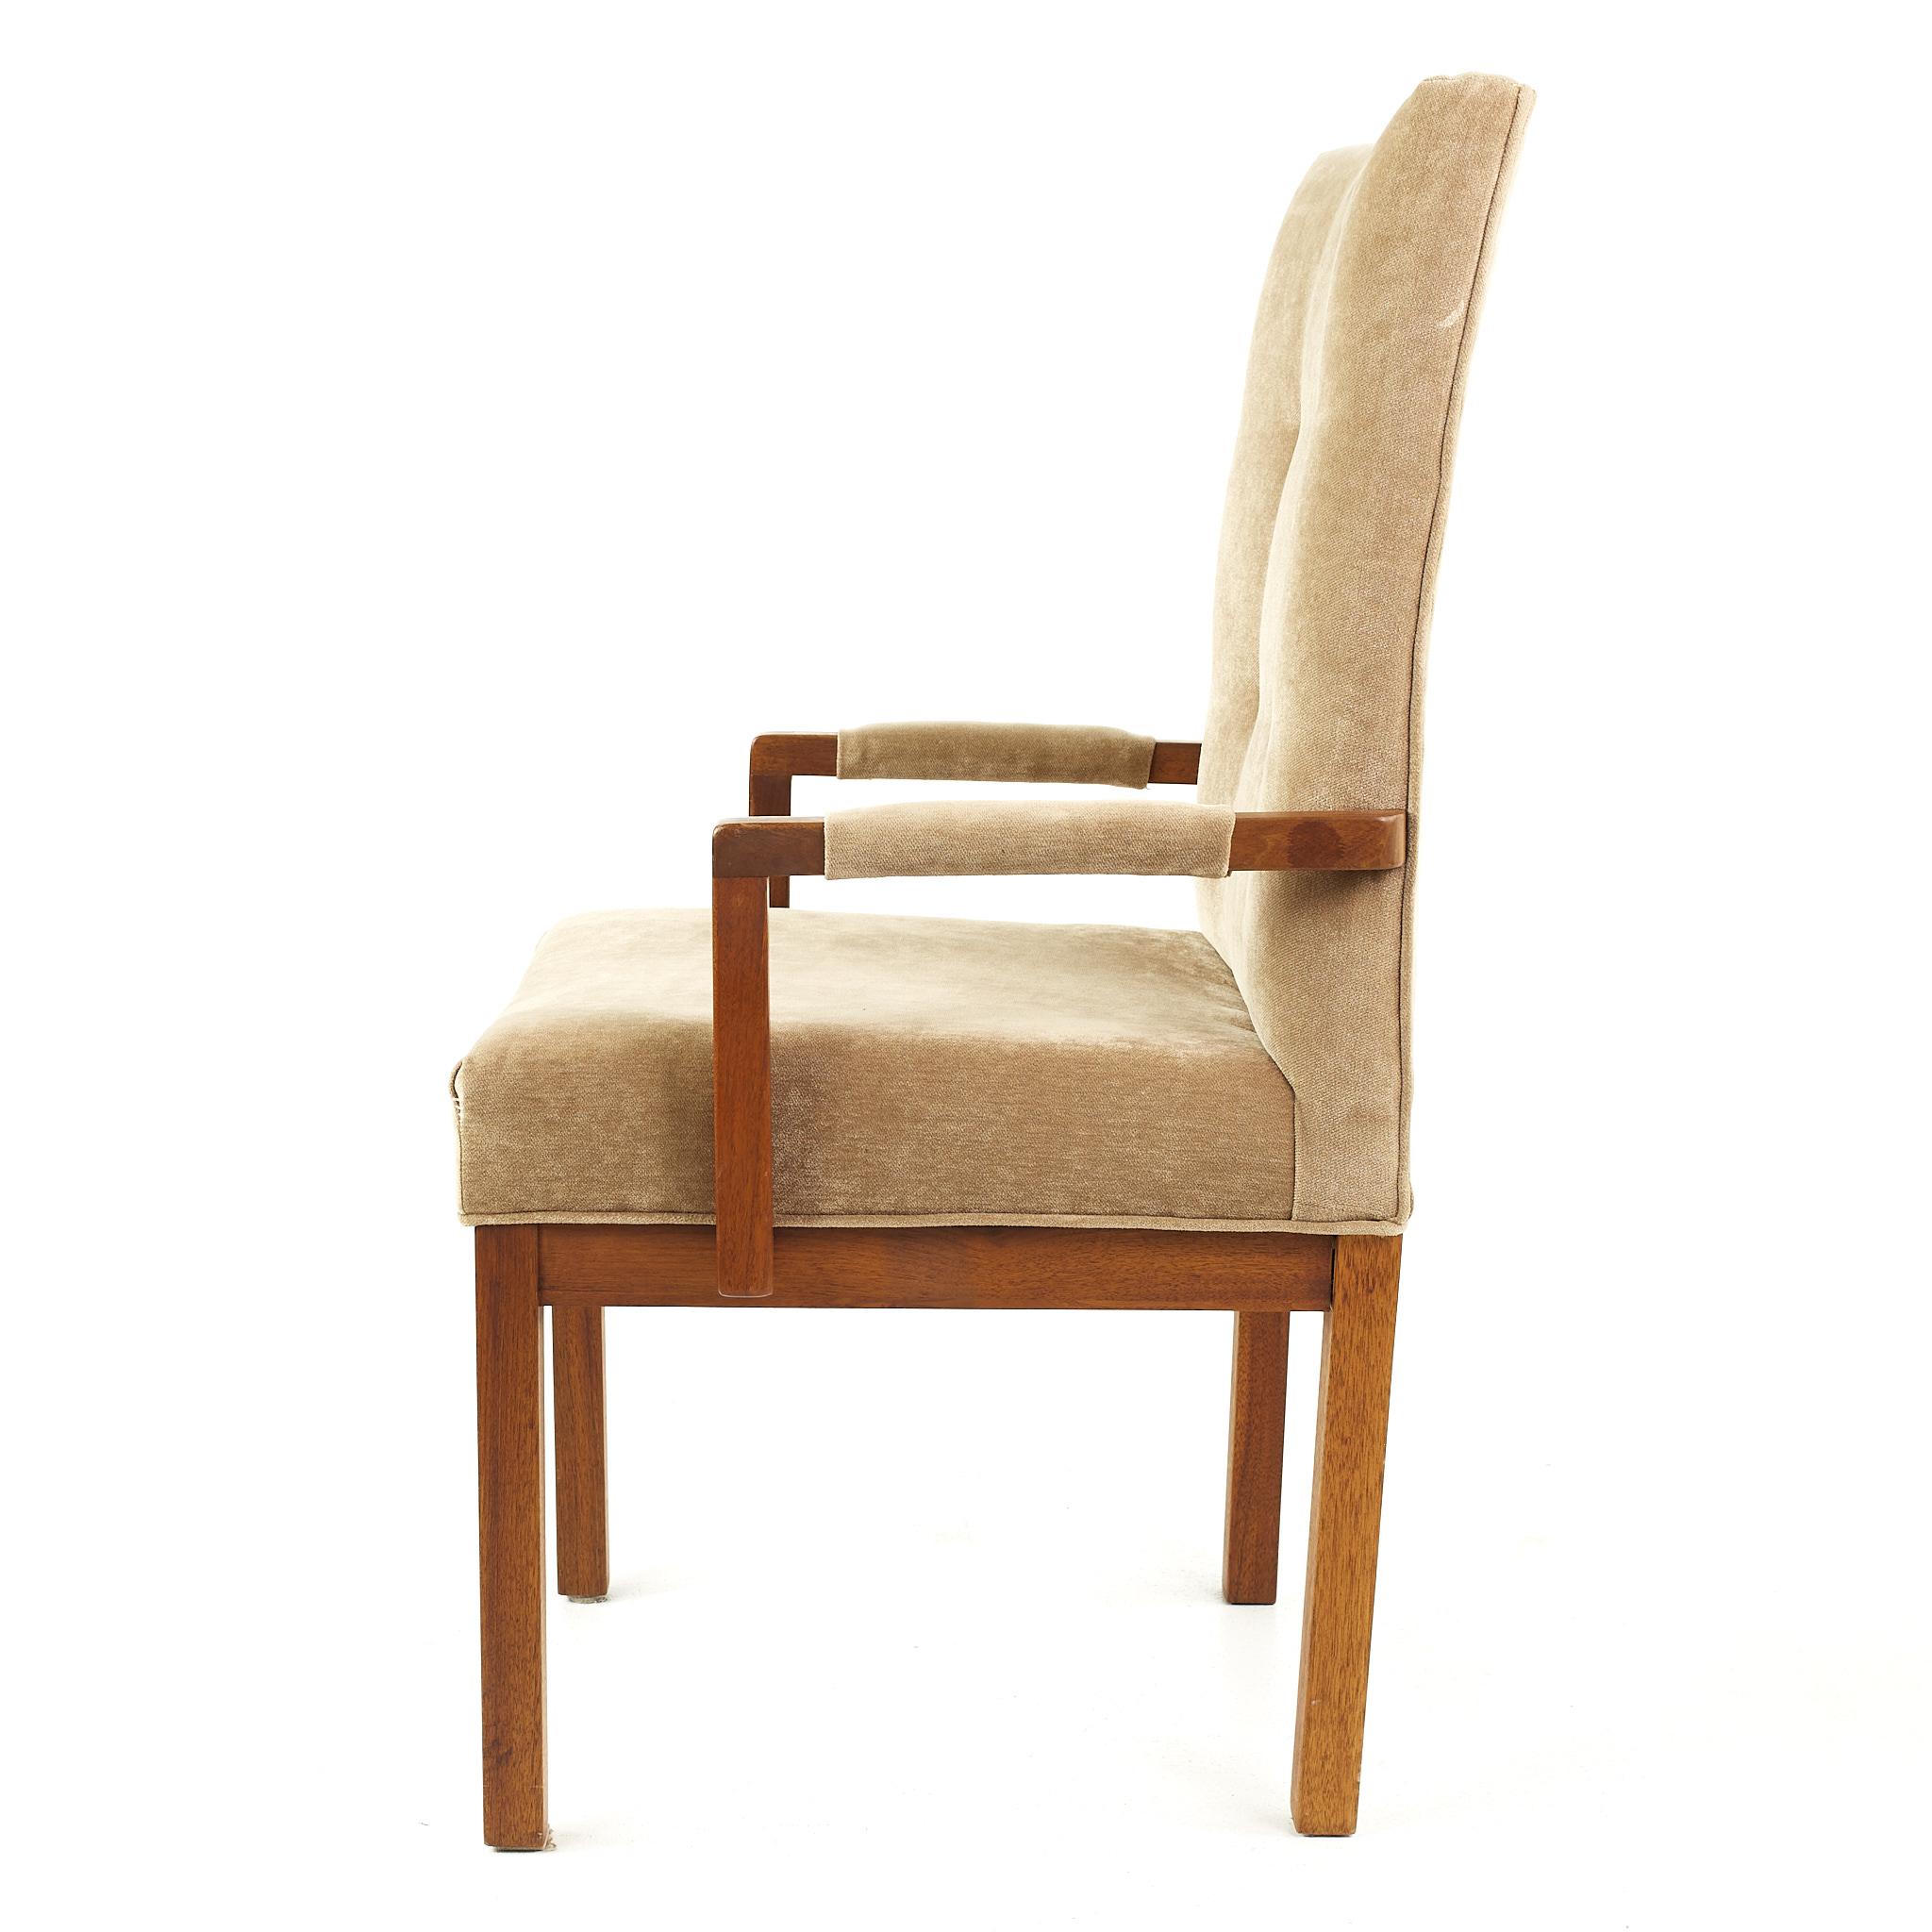 Dillingham Mid Century Walnut Tufted Dining Chairs, Set of 4 For Sale 5